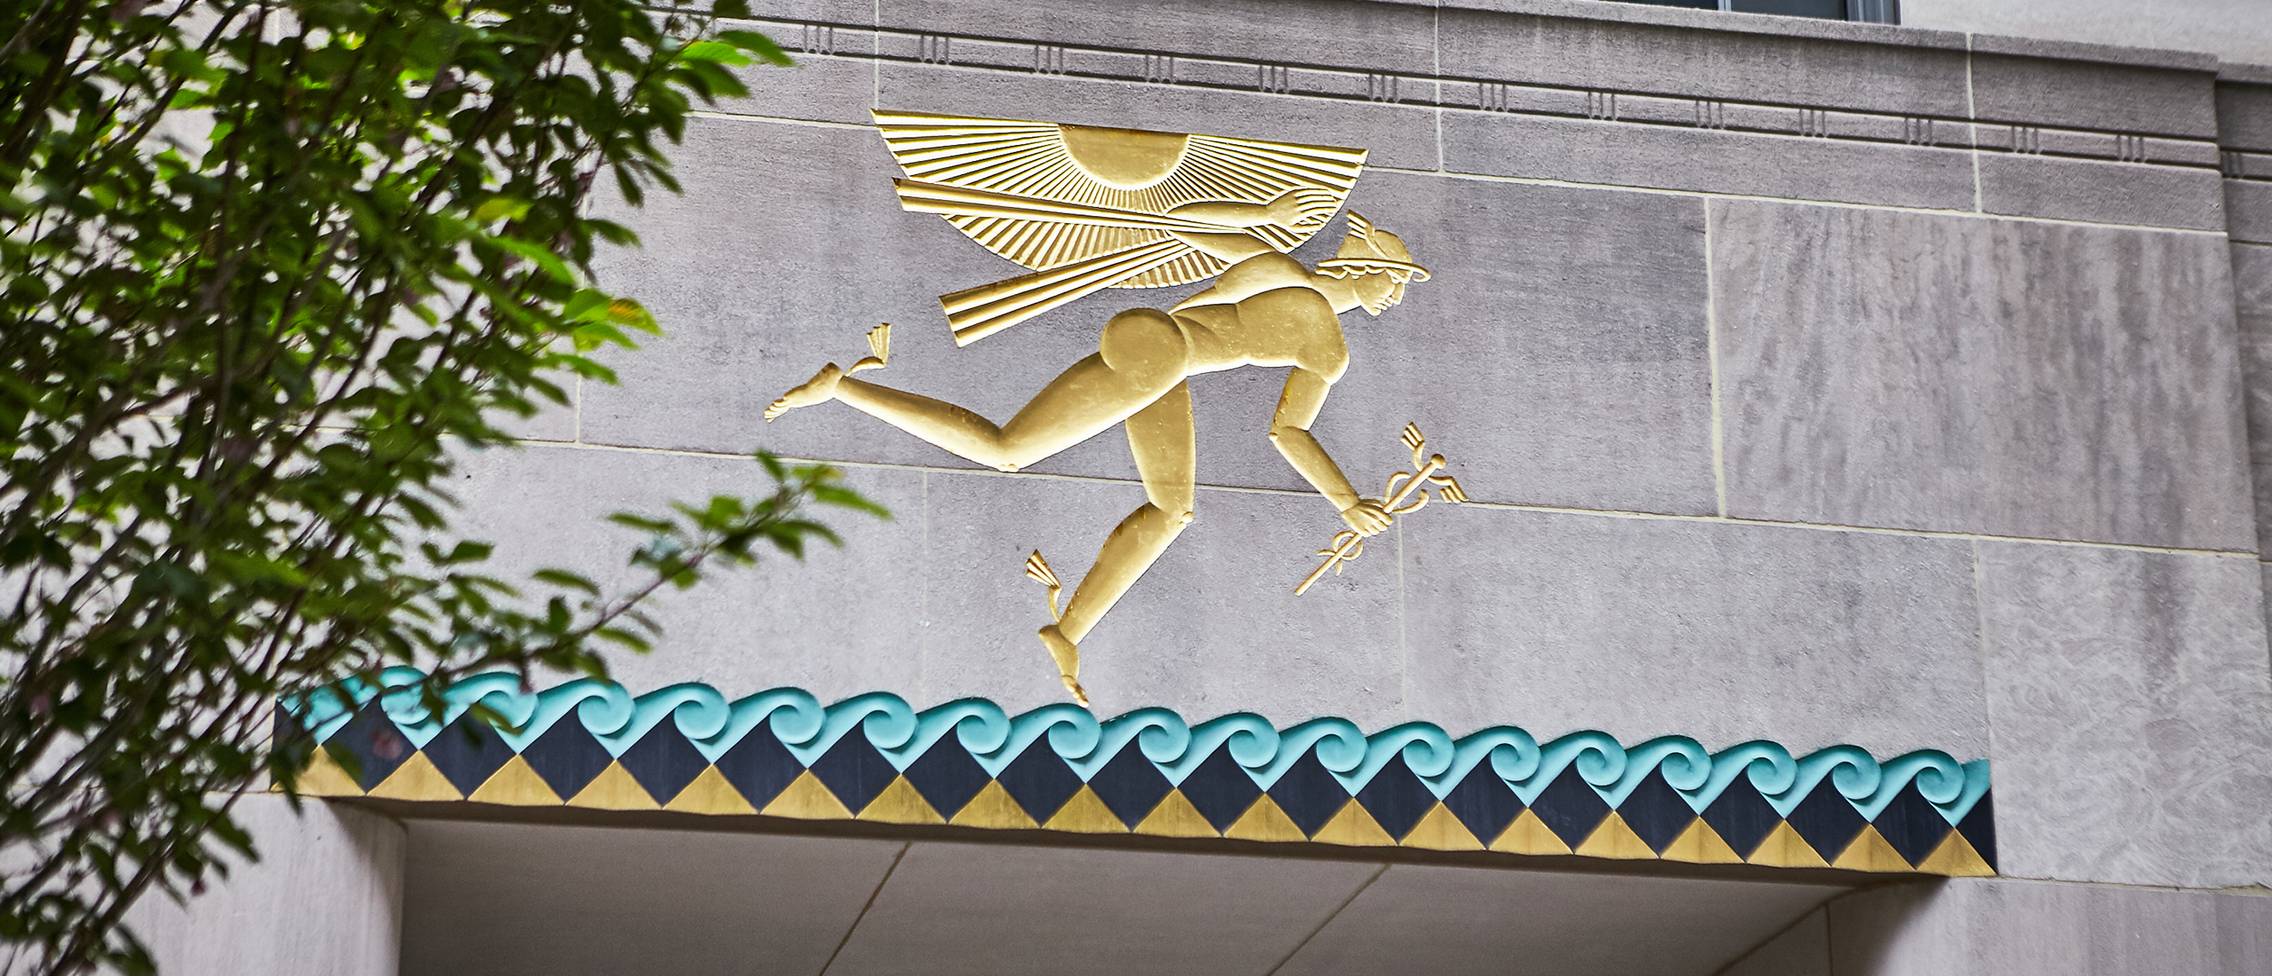 Photograph of Winged Mercury relief from Channel Gardens of 620 Fifth Avenue